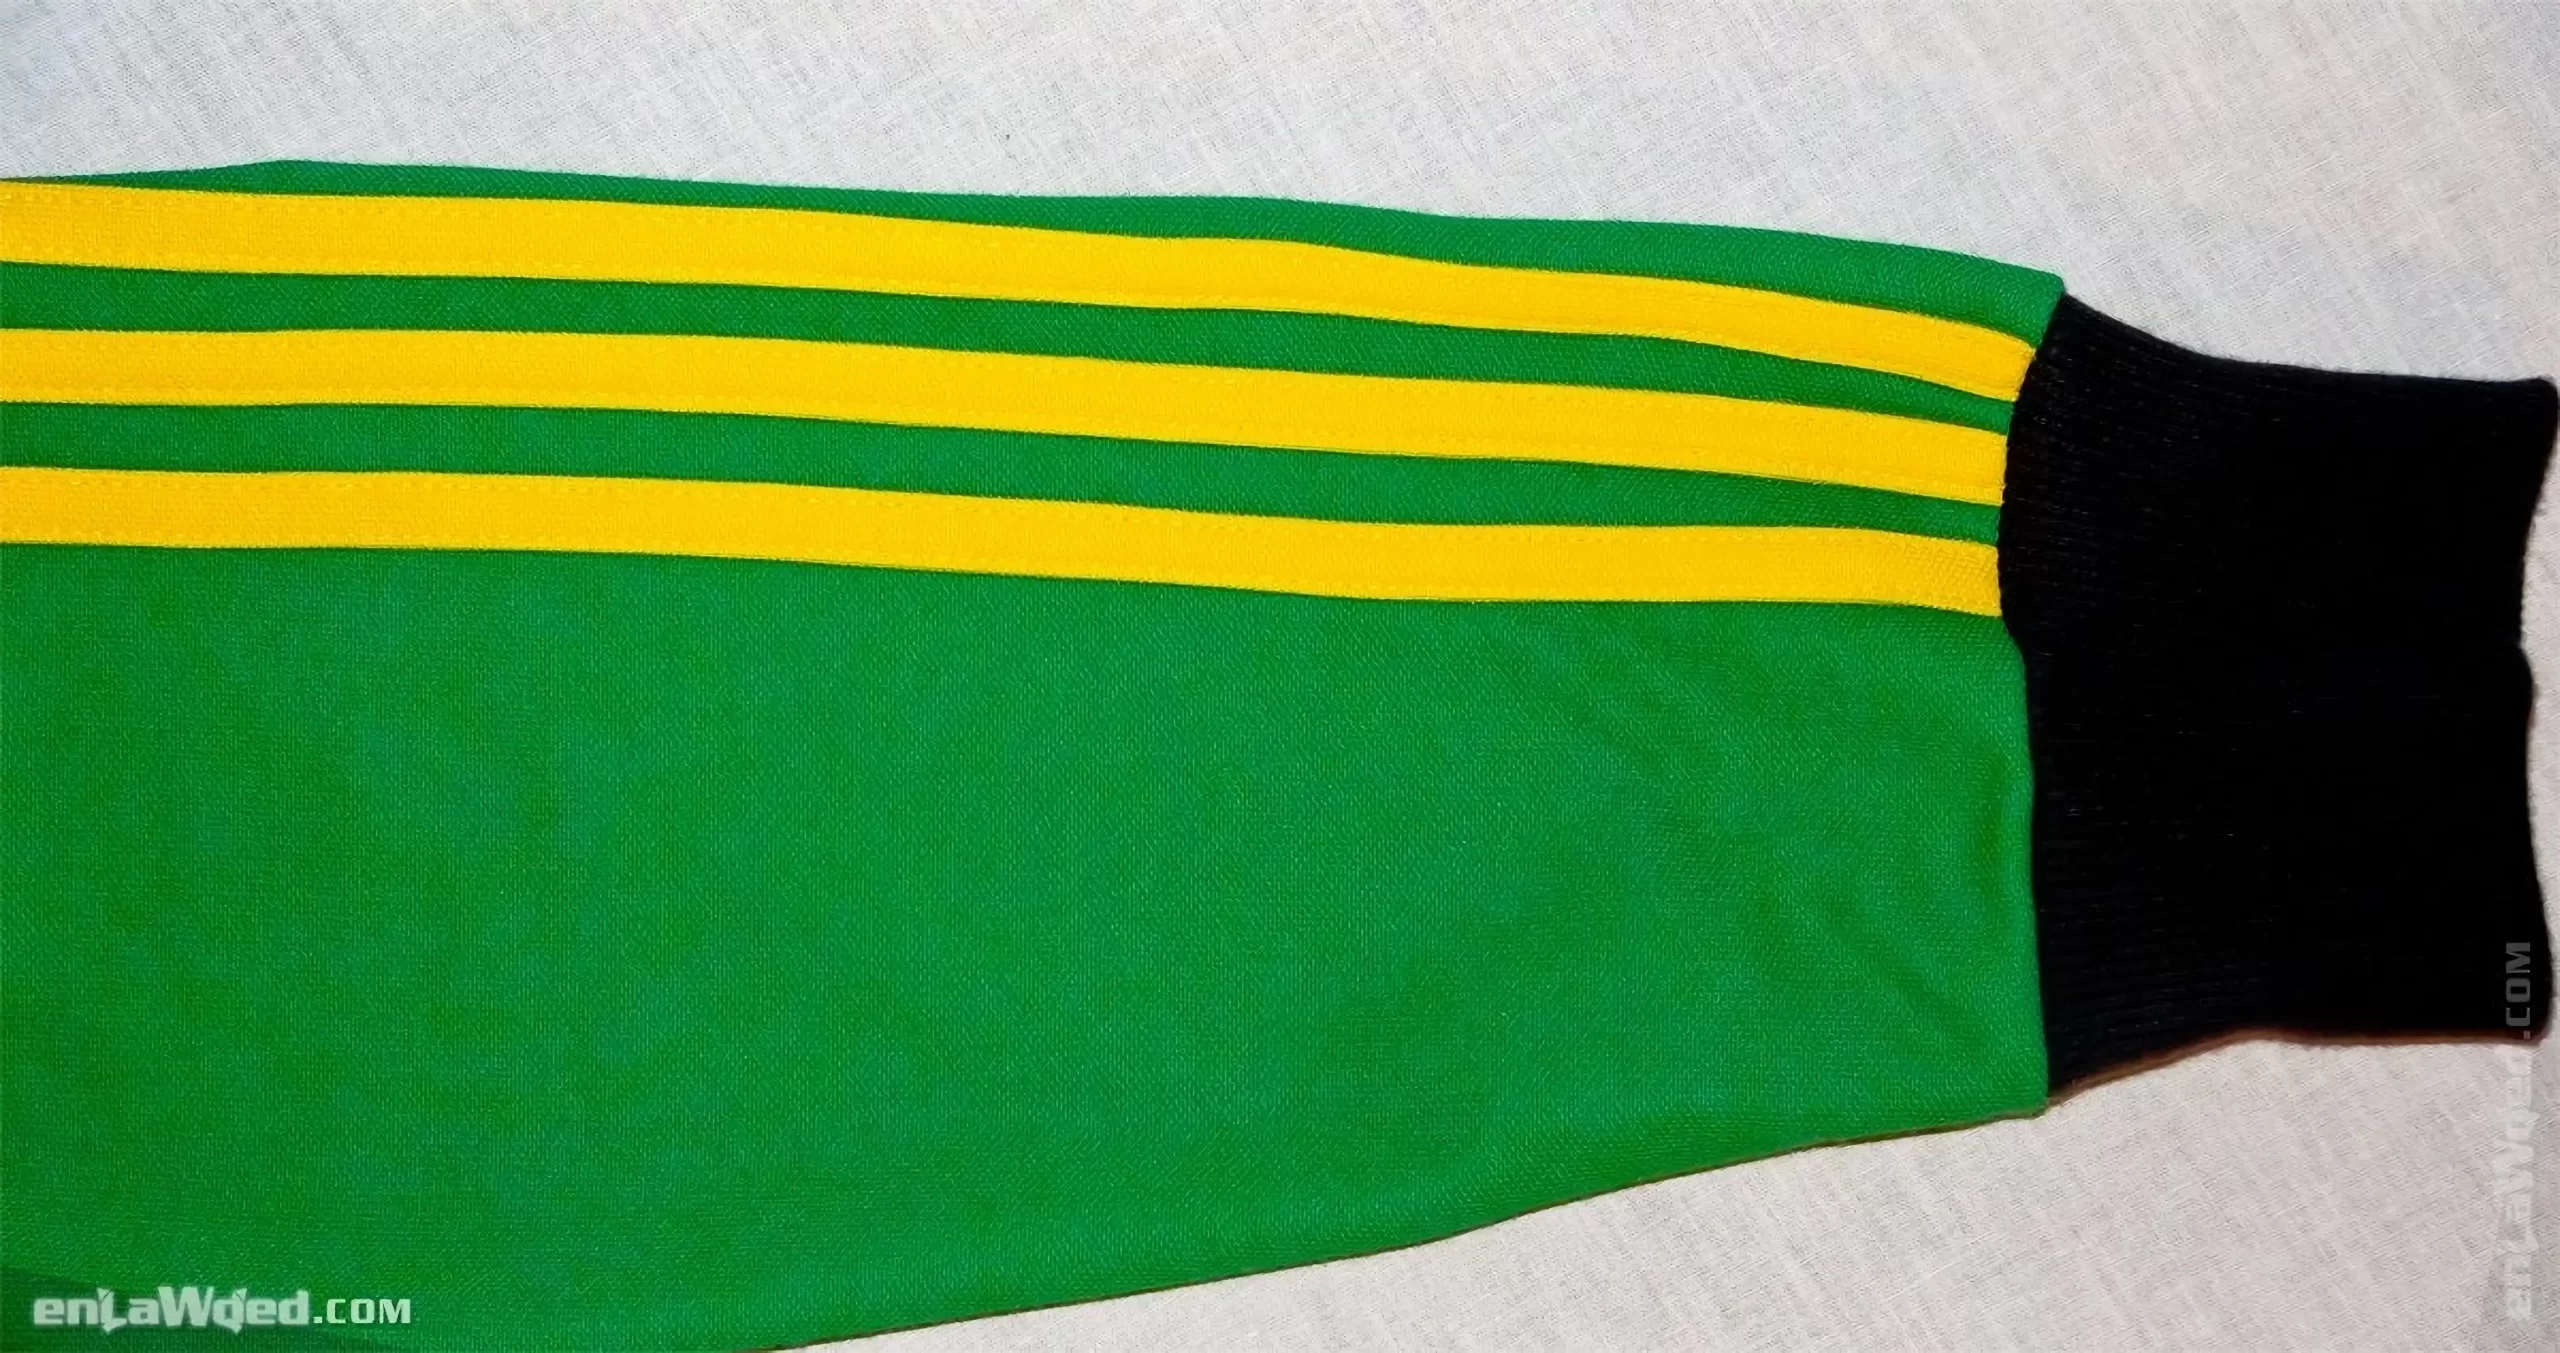 11th interior view of the Adidas Originals Cape Town Track Top